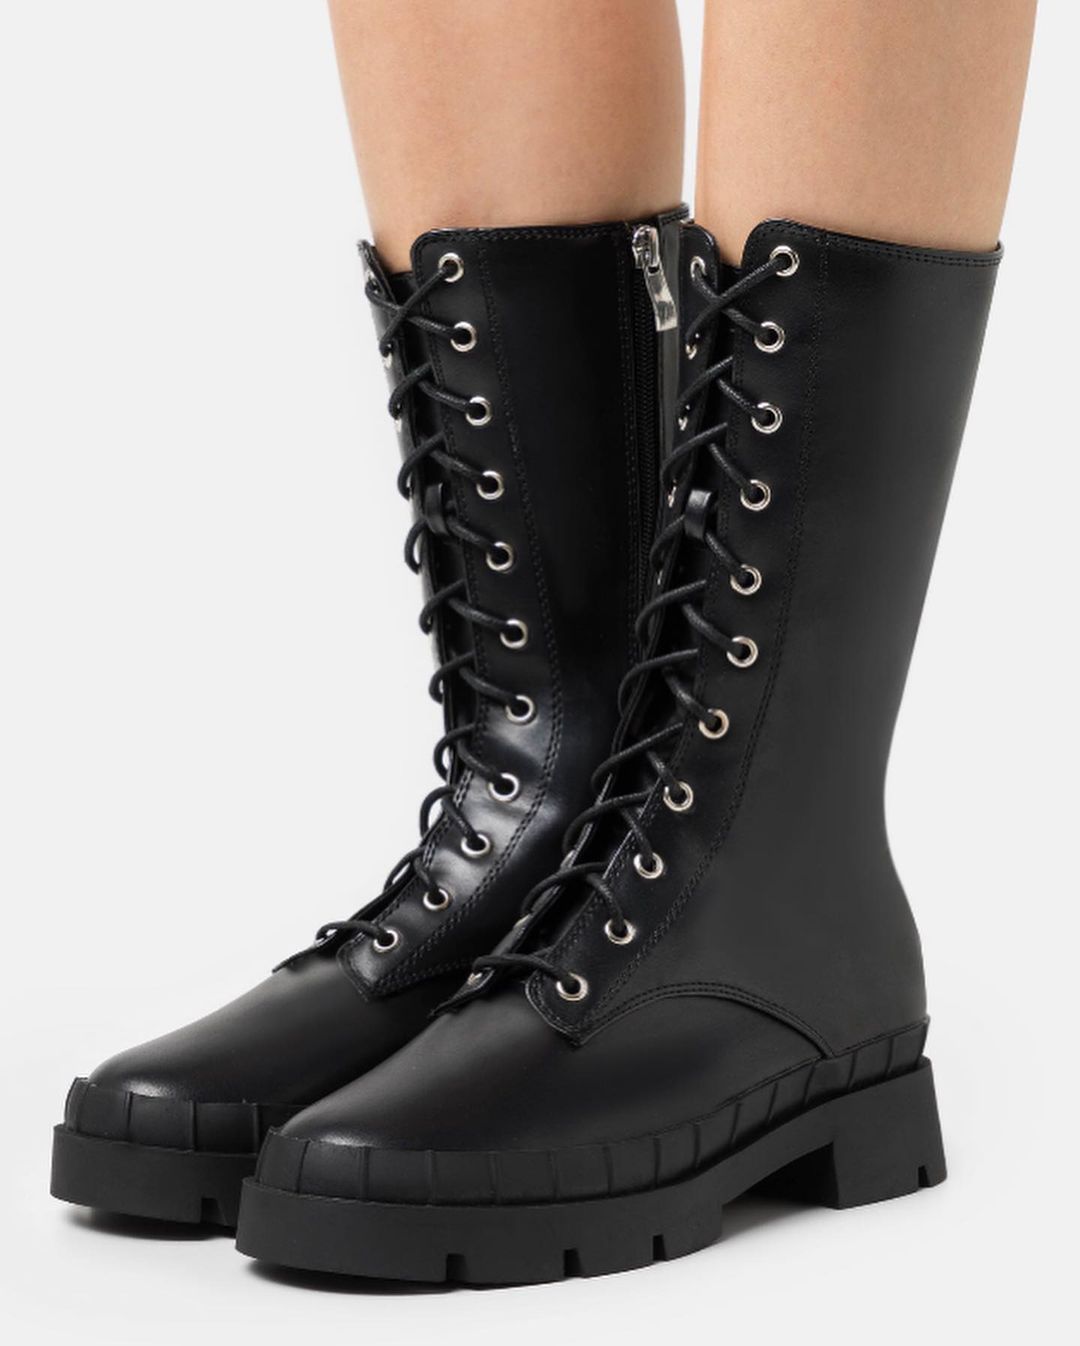 Black Classy Lace-up Boots for Women